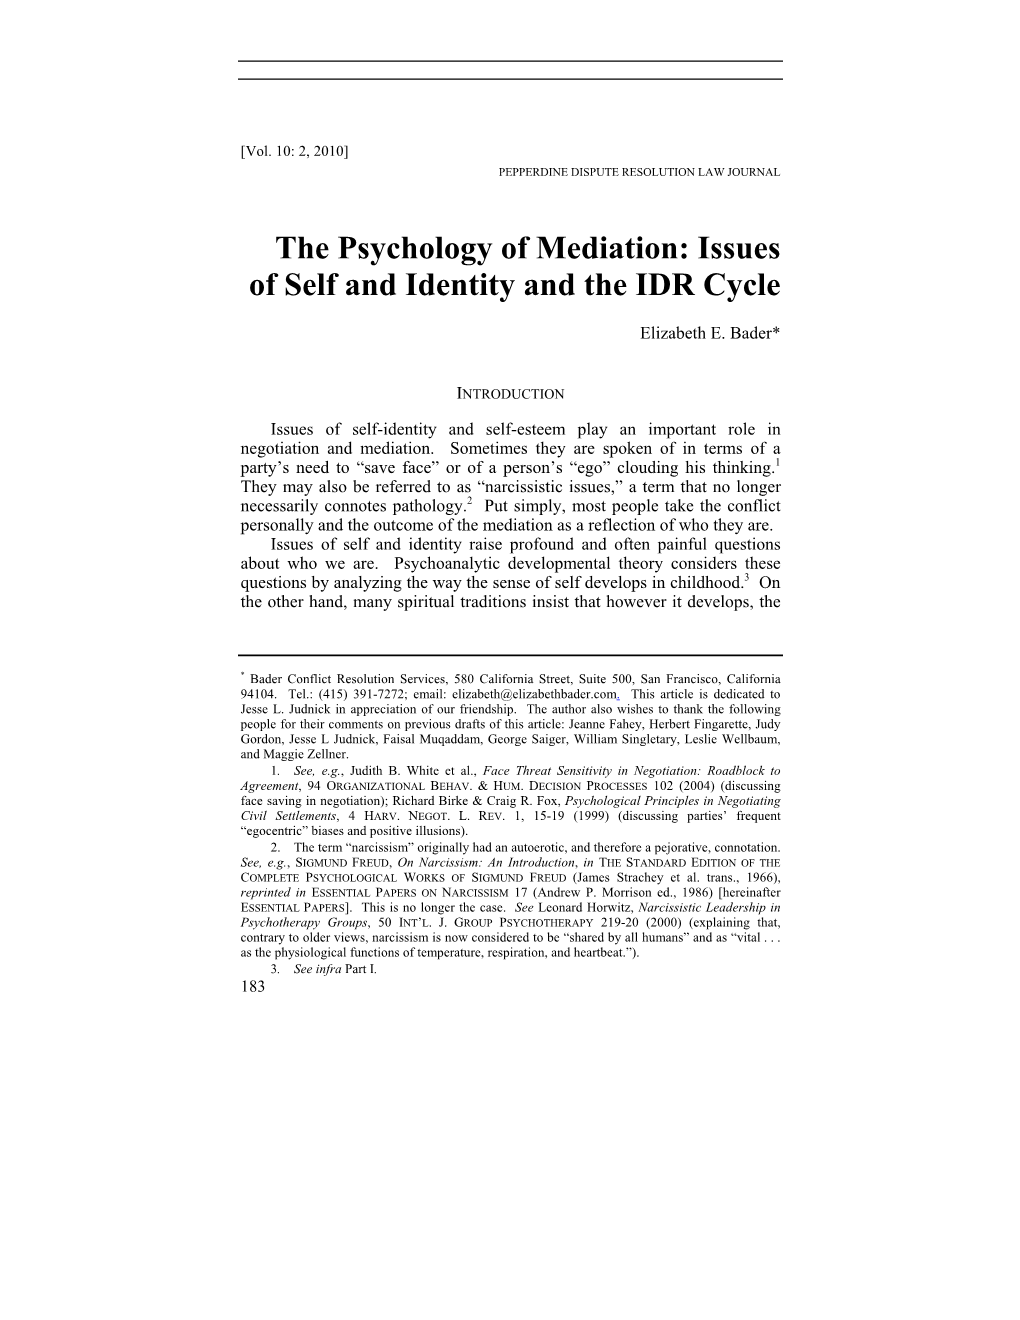 The Psychology of Mediation: Issues of Self and Identity and the IDR Cycle